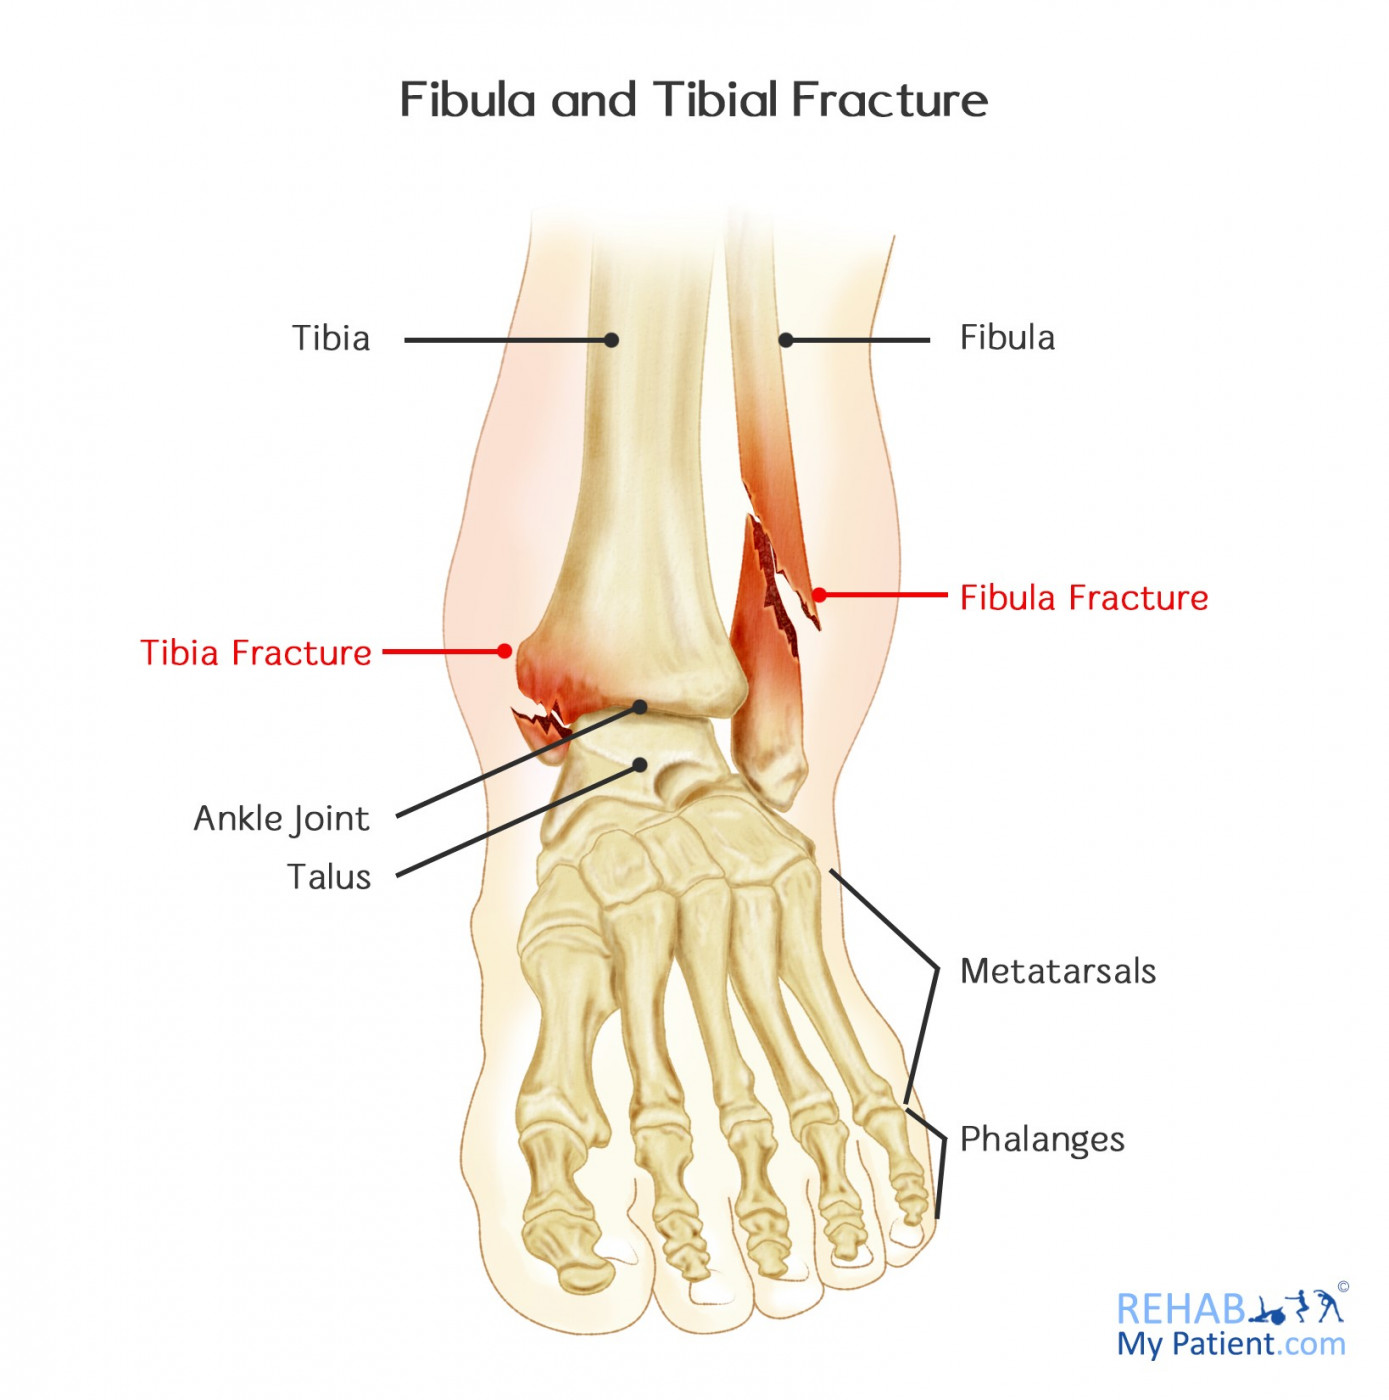 Fibula and Tibial Fracture | Rehab My Patient